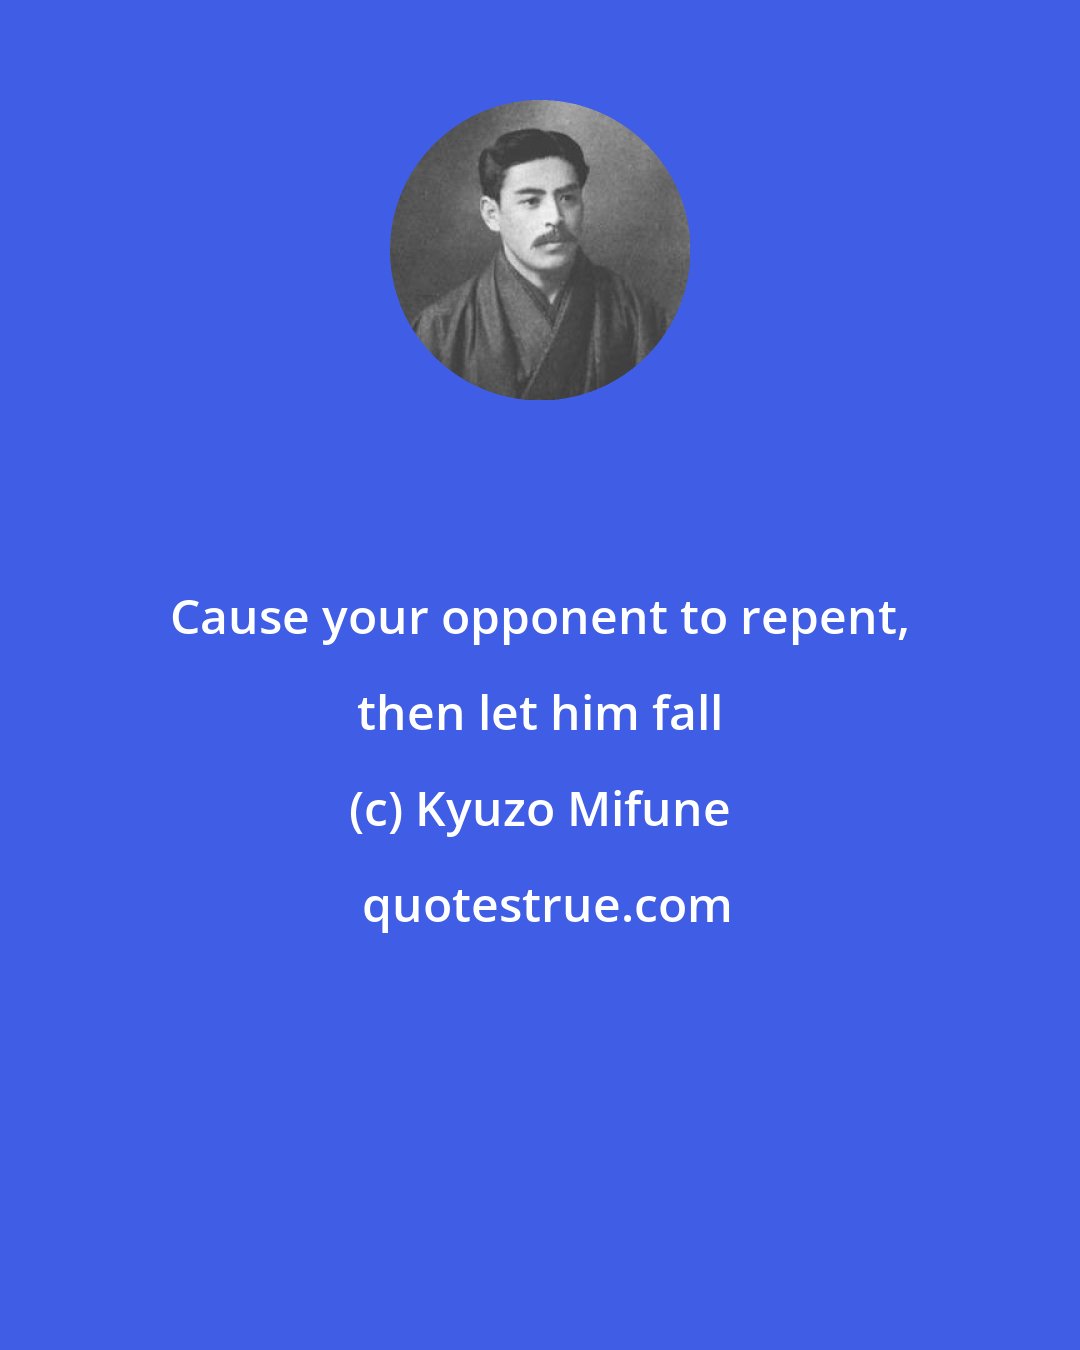 Kyuzo Mifune: Cause your opponent to repent, then let him fall